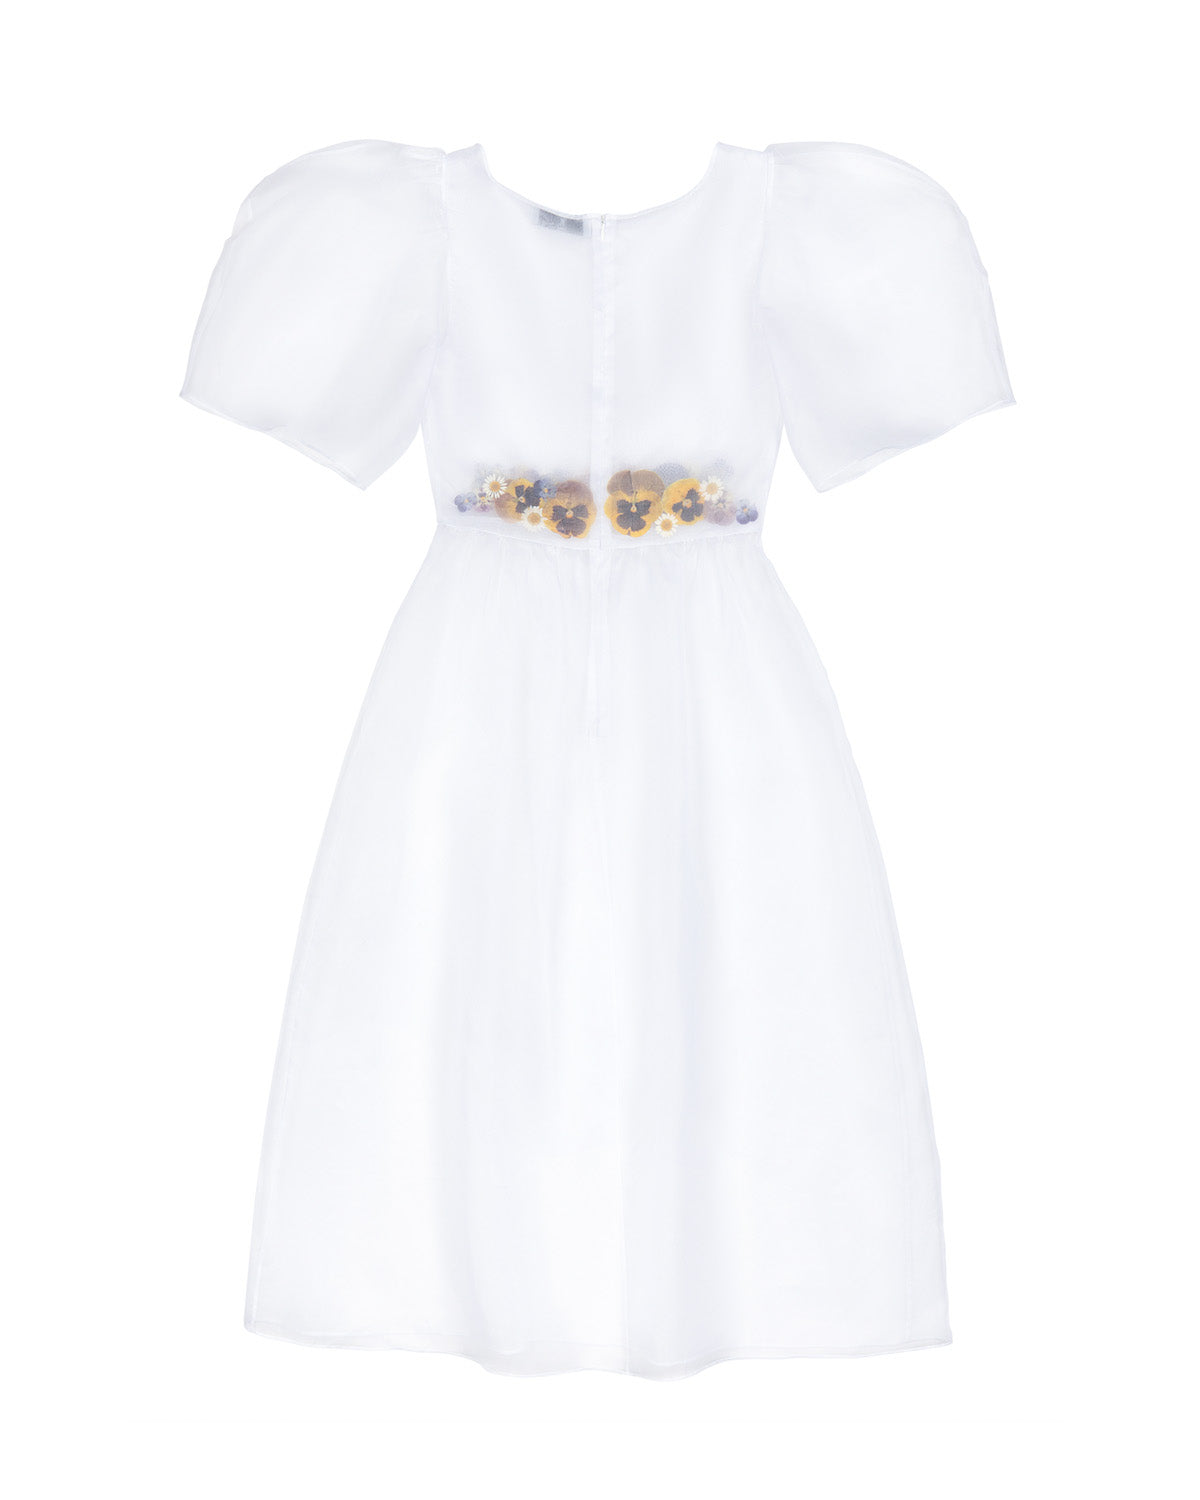 White silk organza dress, inlaid with real pressed pansy and daisy paillettes to front and back waist